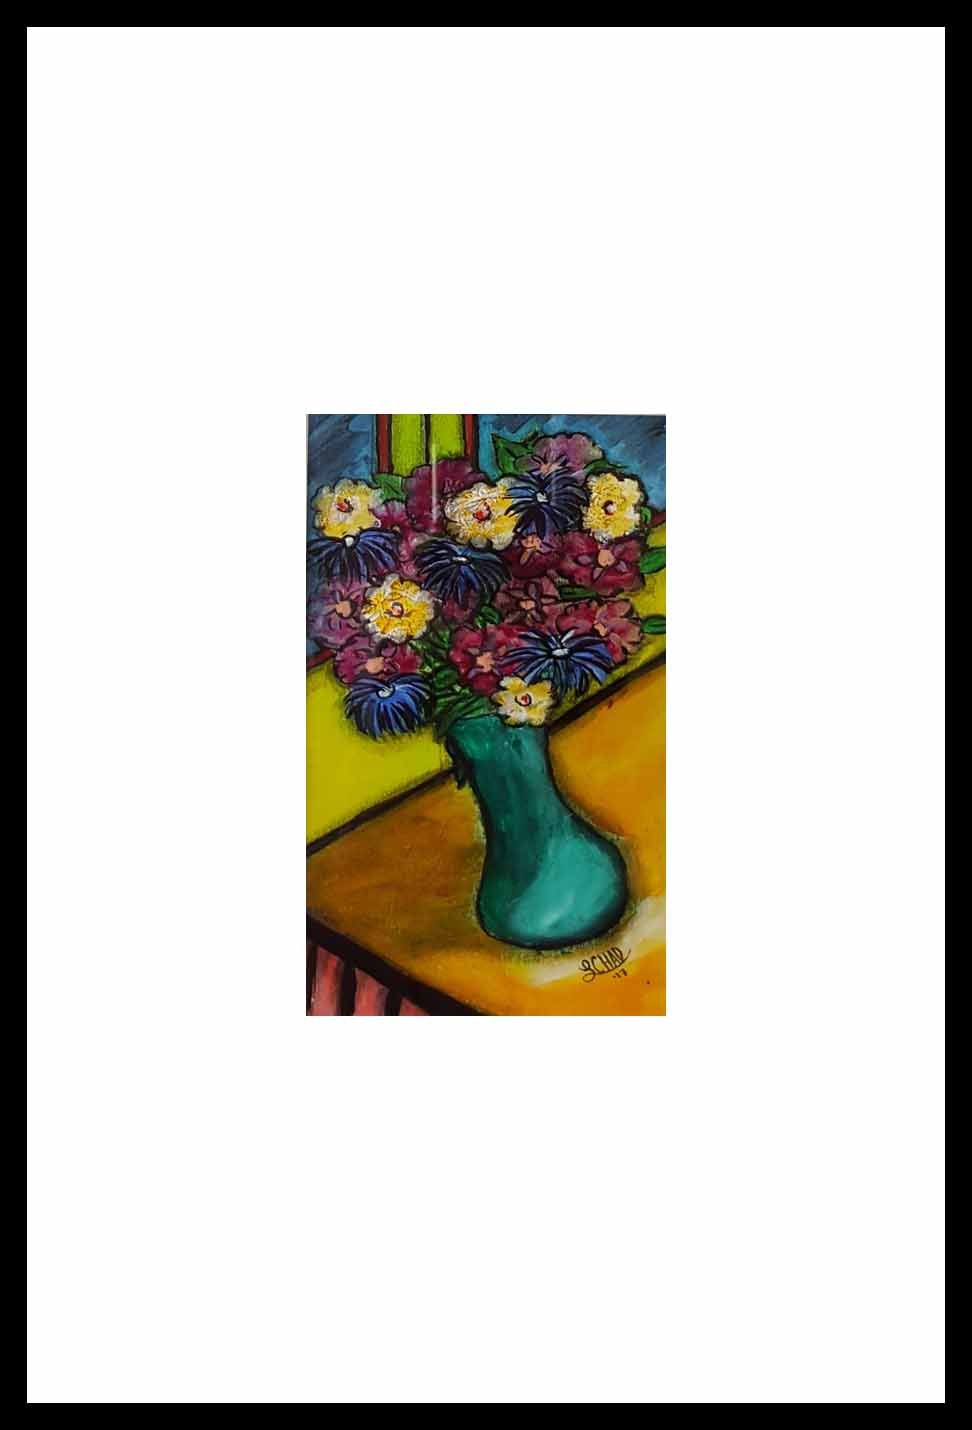 2017-11 "Sunnyways Bouquet"
Framed 8.25" x 14.5"
Mixed media on 246 lb paper
$150.00